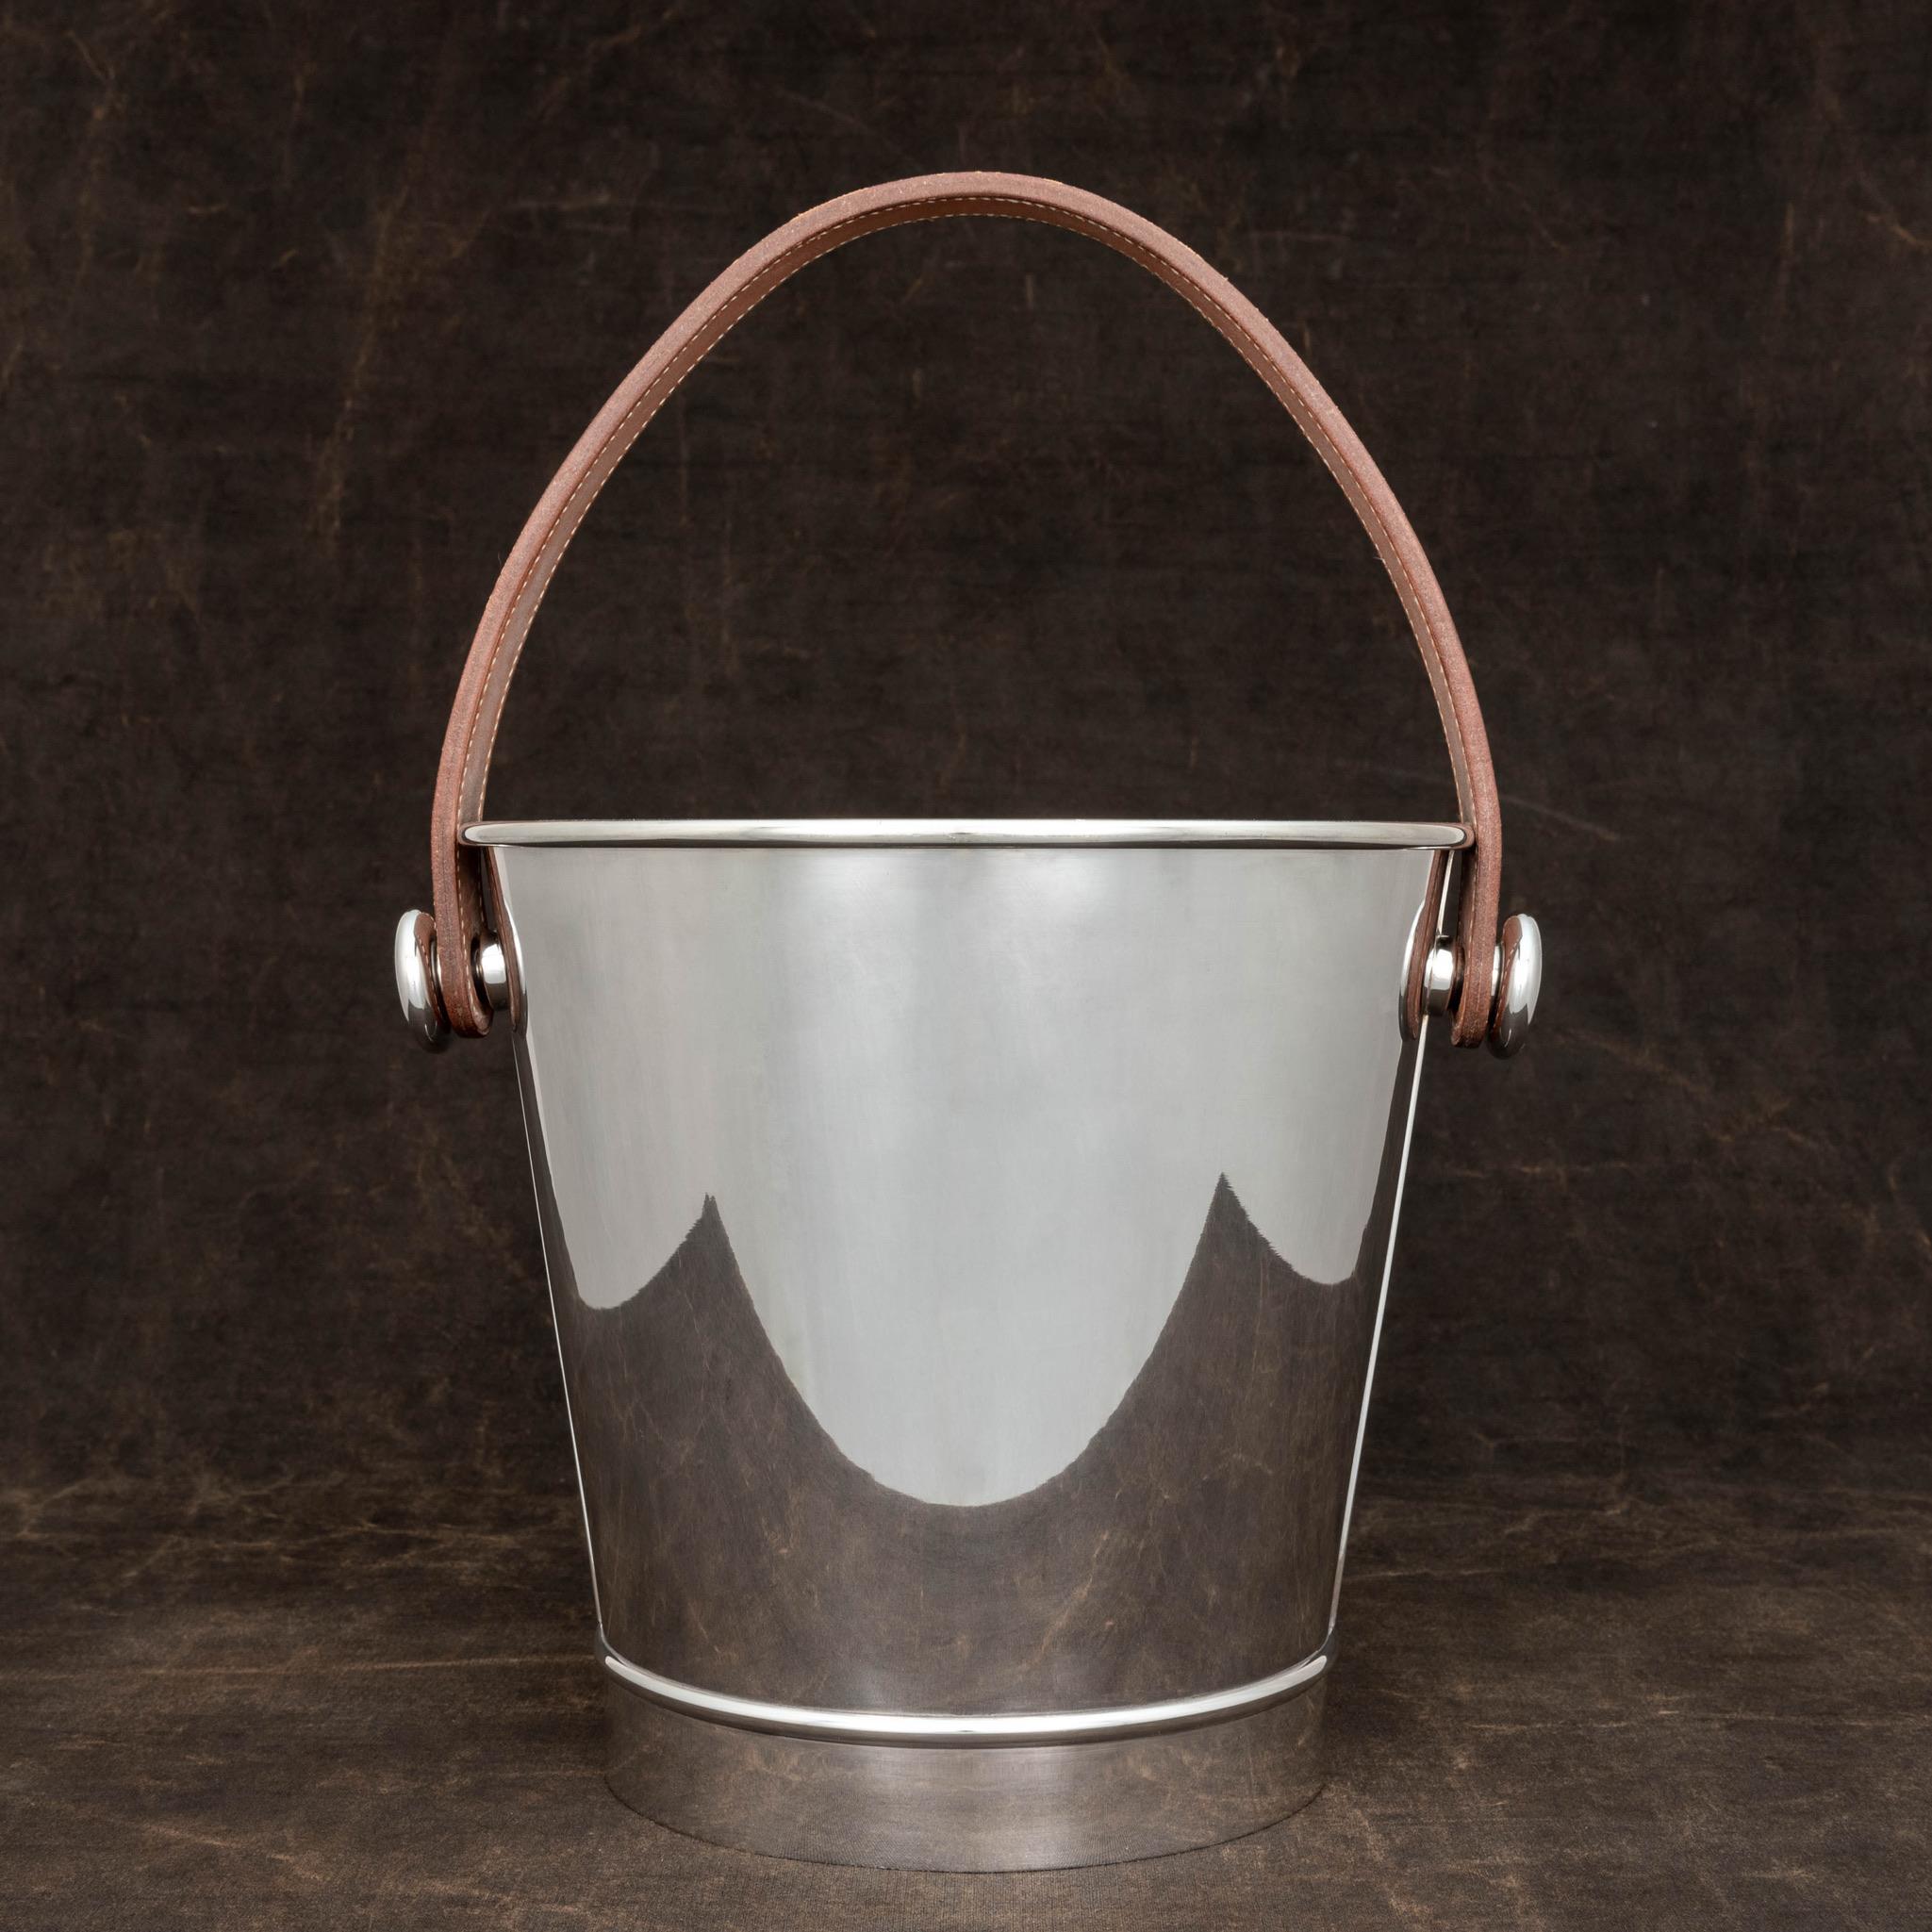 Fabulous 1970’s Hermès silver plated ice bucket with original natural leather handle that is beautifully hand stitched with white saddle stitching. Marked Hermès on the base of the bucket and end of the leather handle.


Dimensions: 24.5cm/ 9?